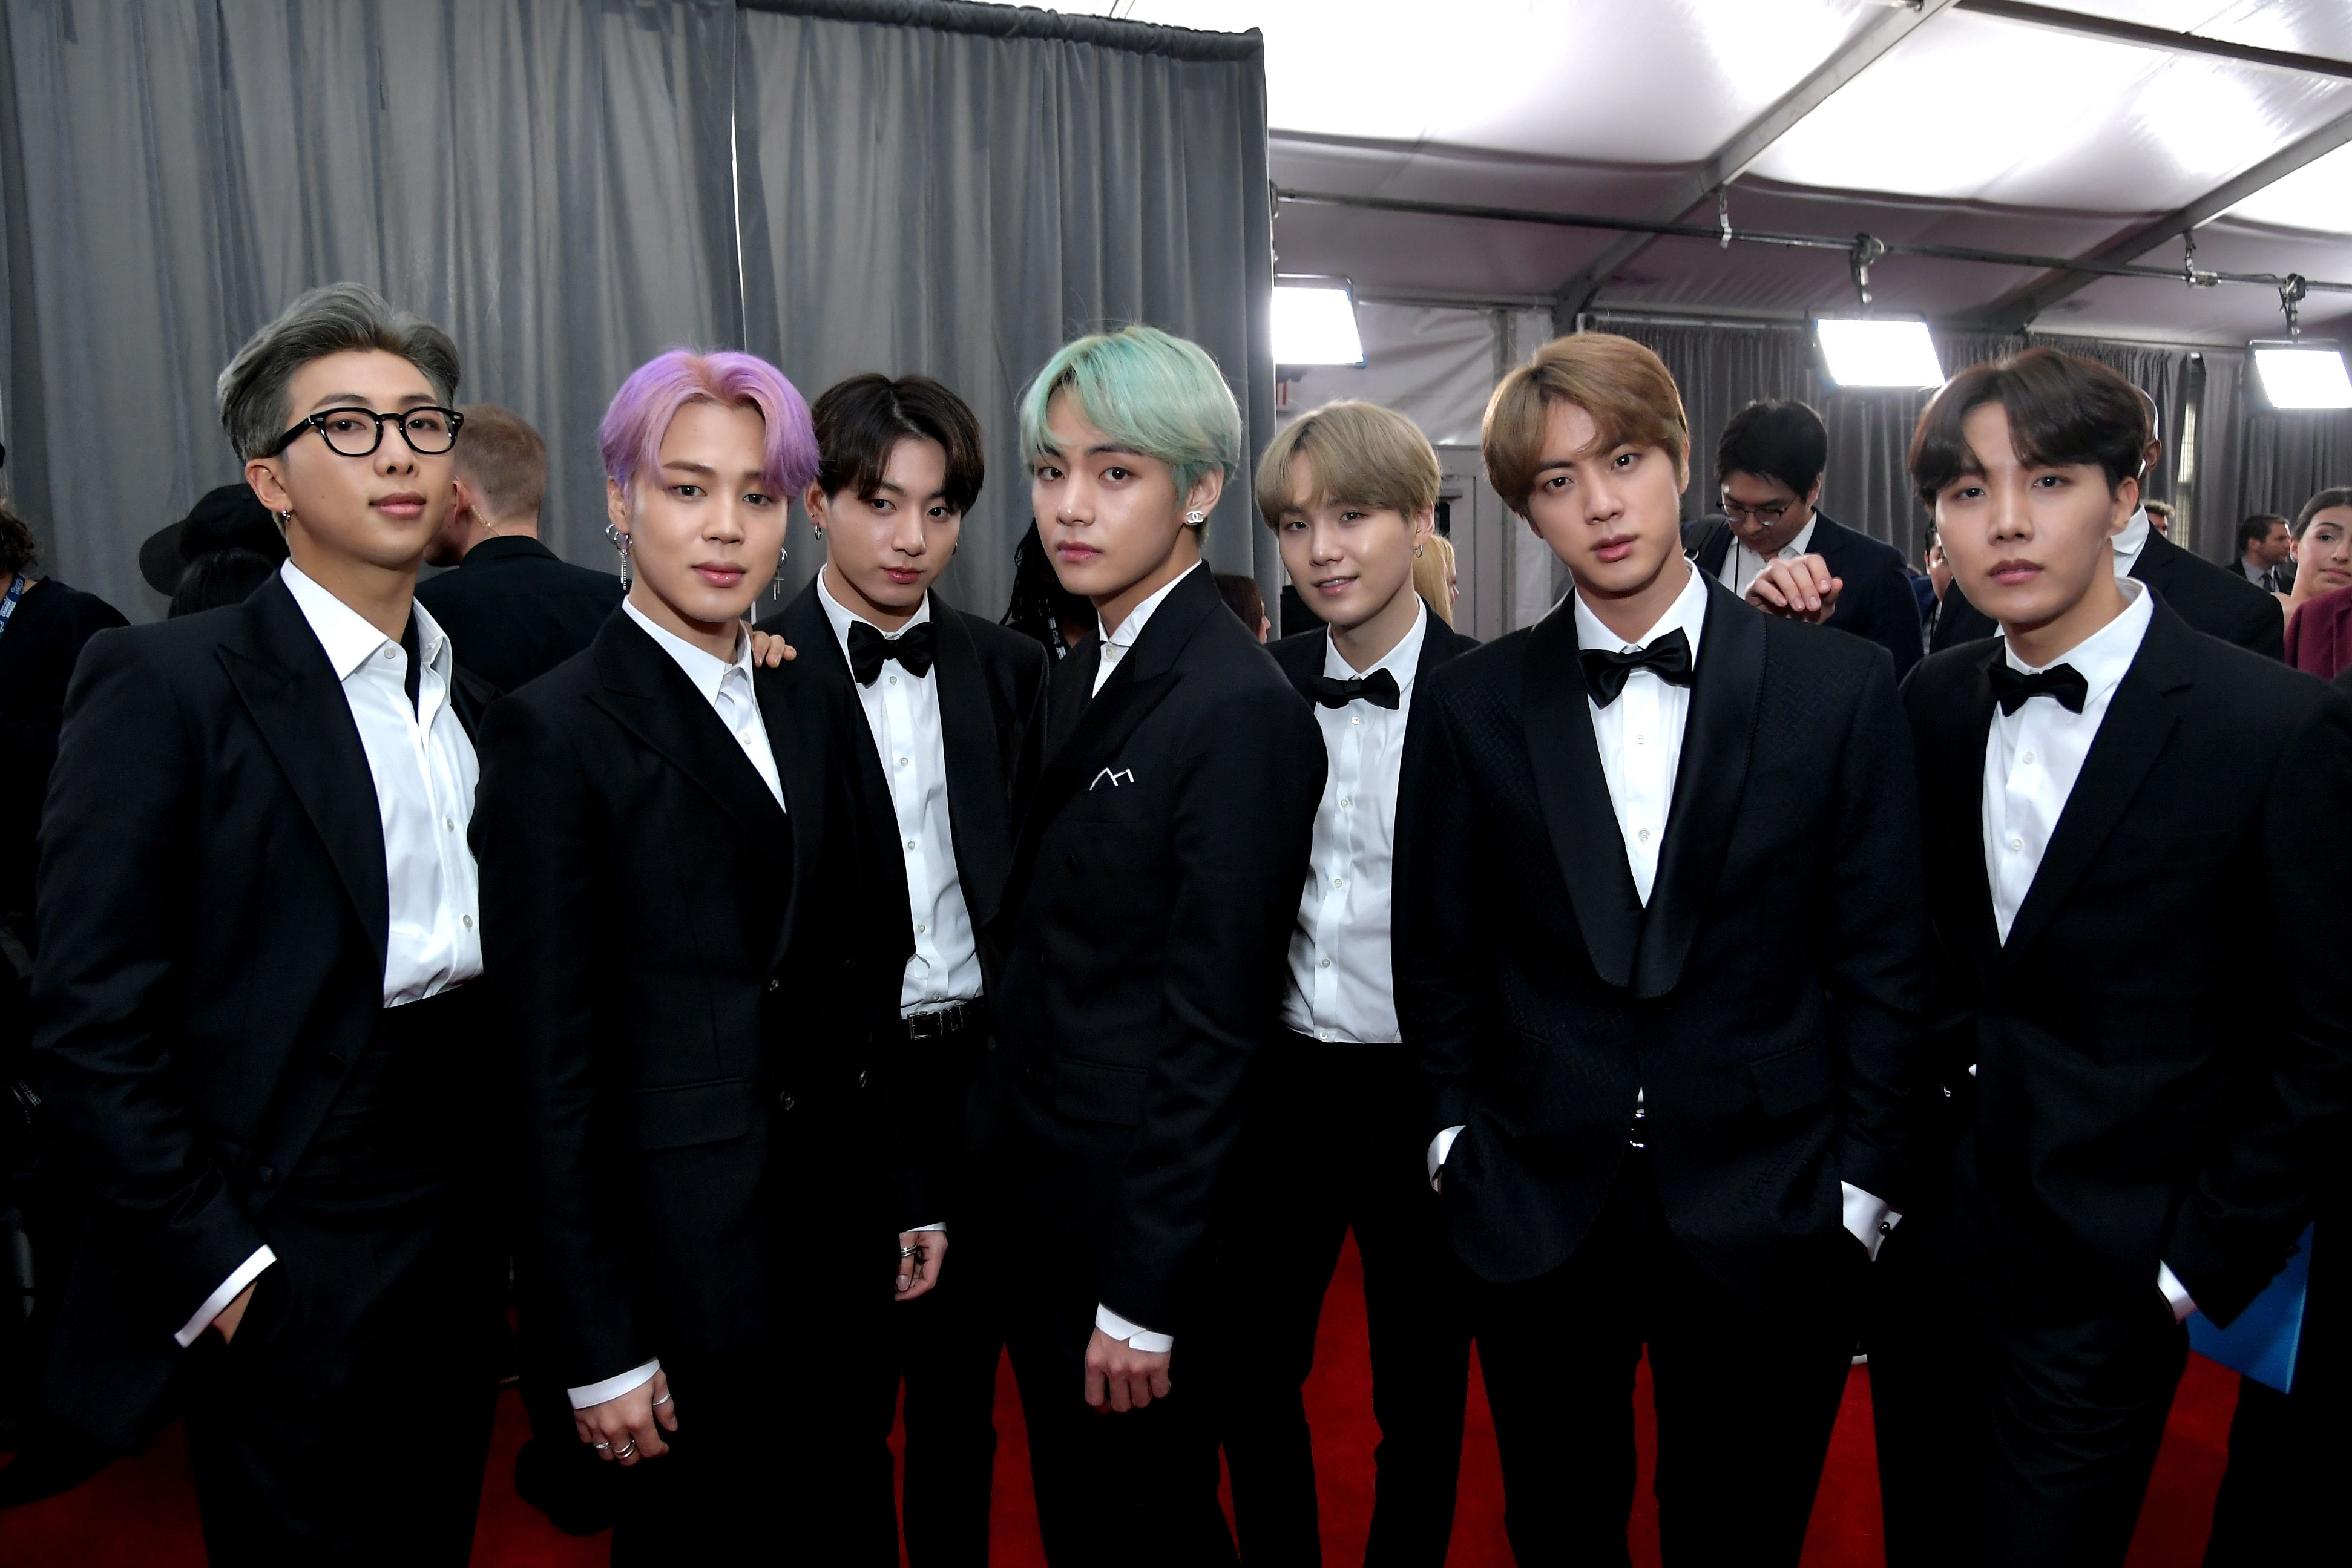 What BTS's V, RM, Suga, Jimin, Jungkook, Jin, and J-Hope Wore on Grammys  2019 Red Carpet